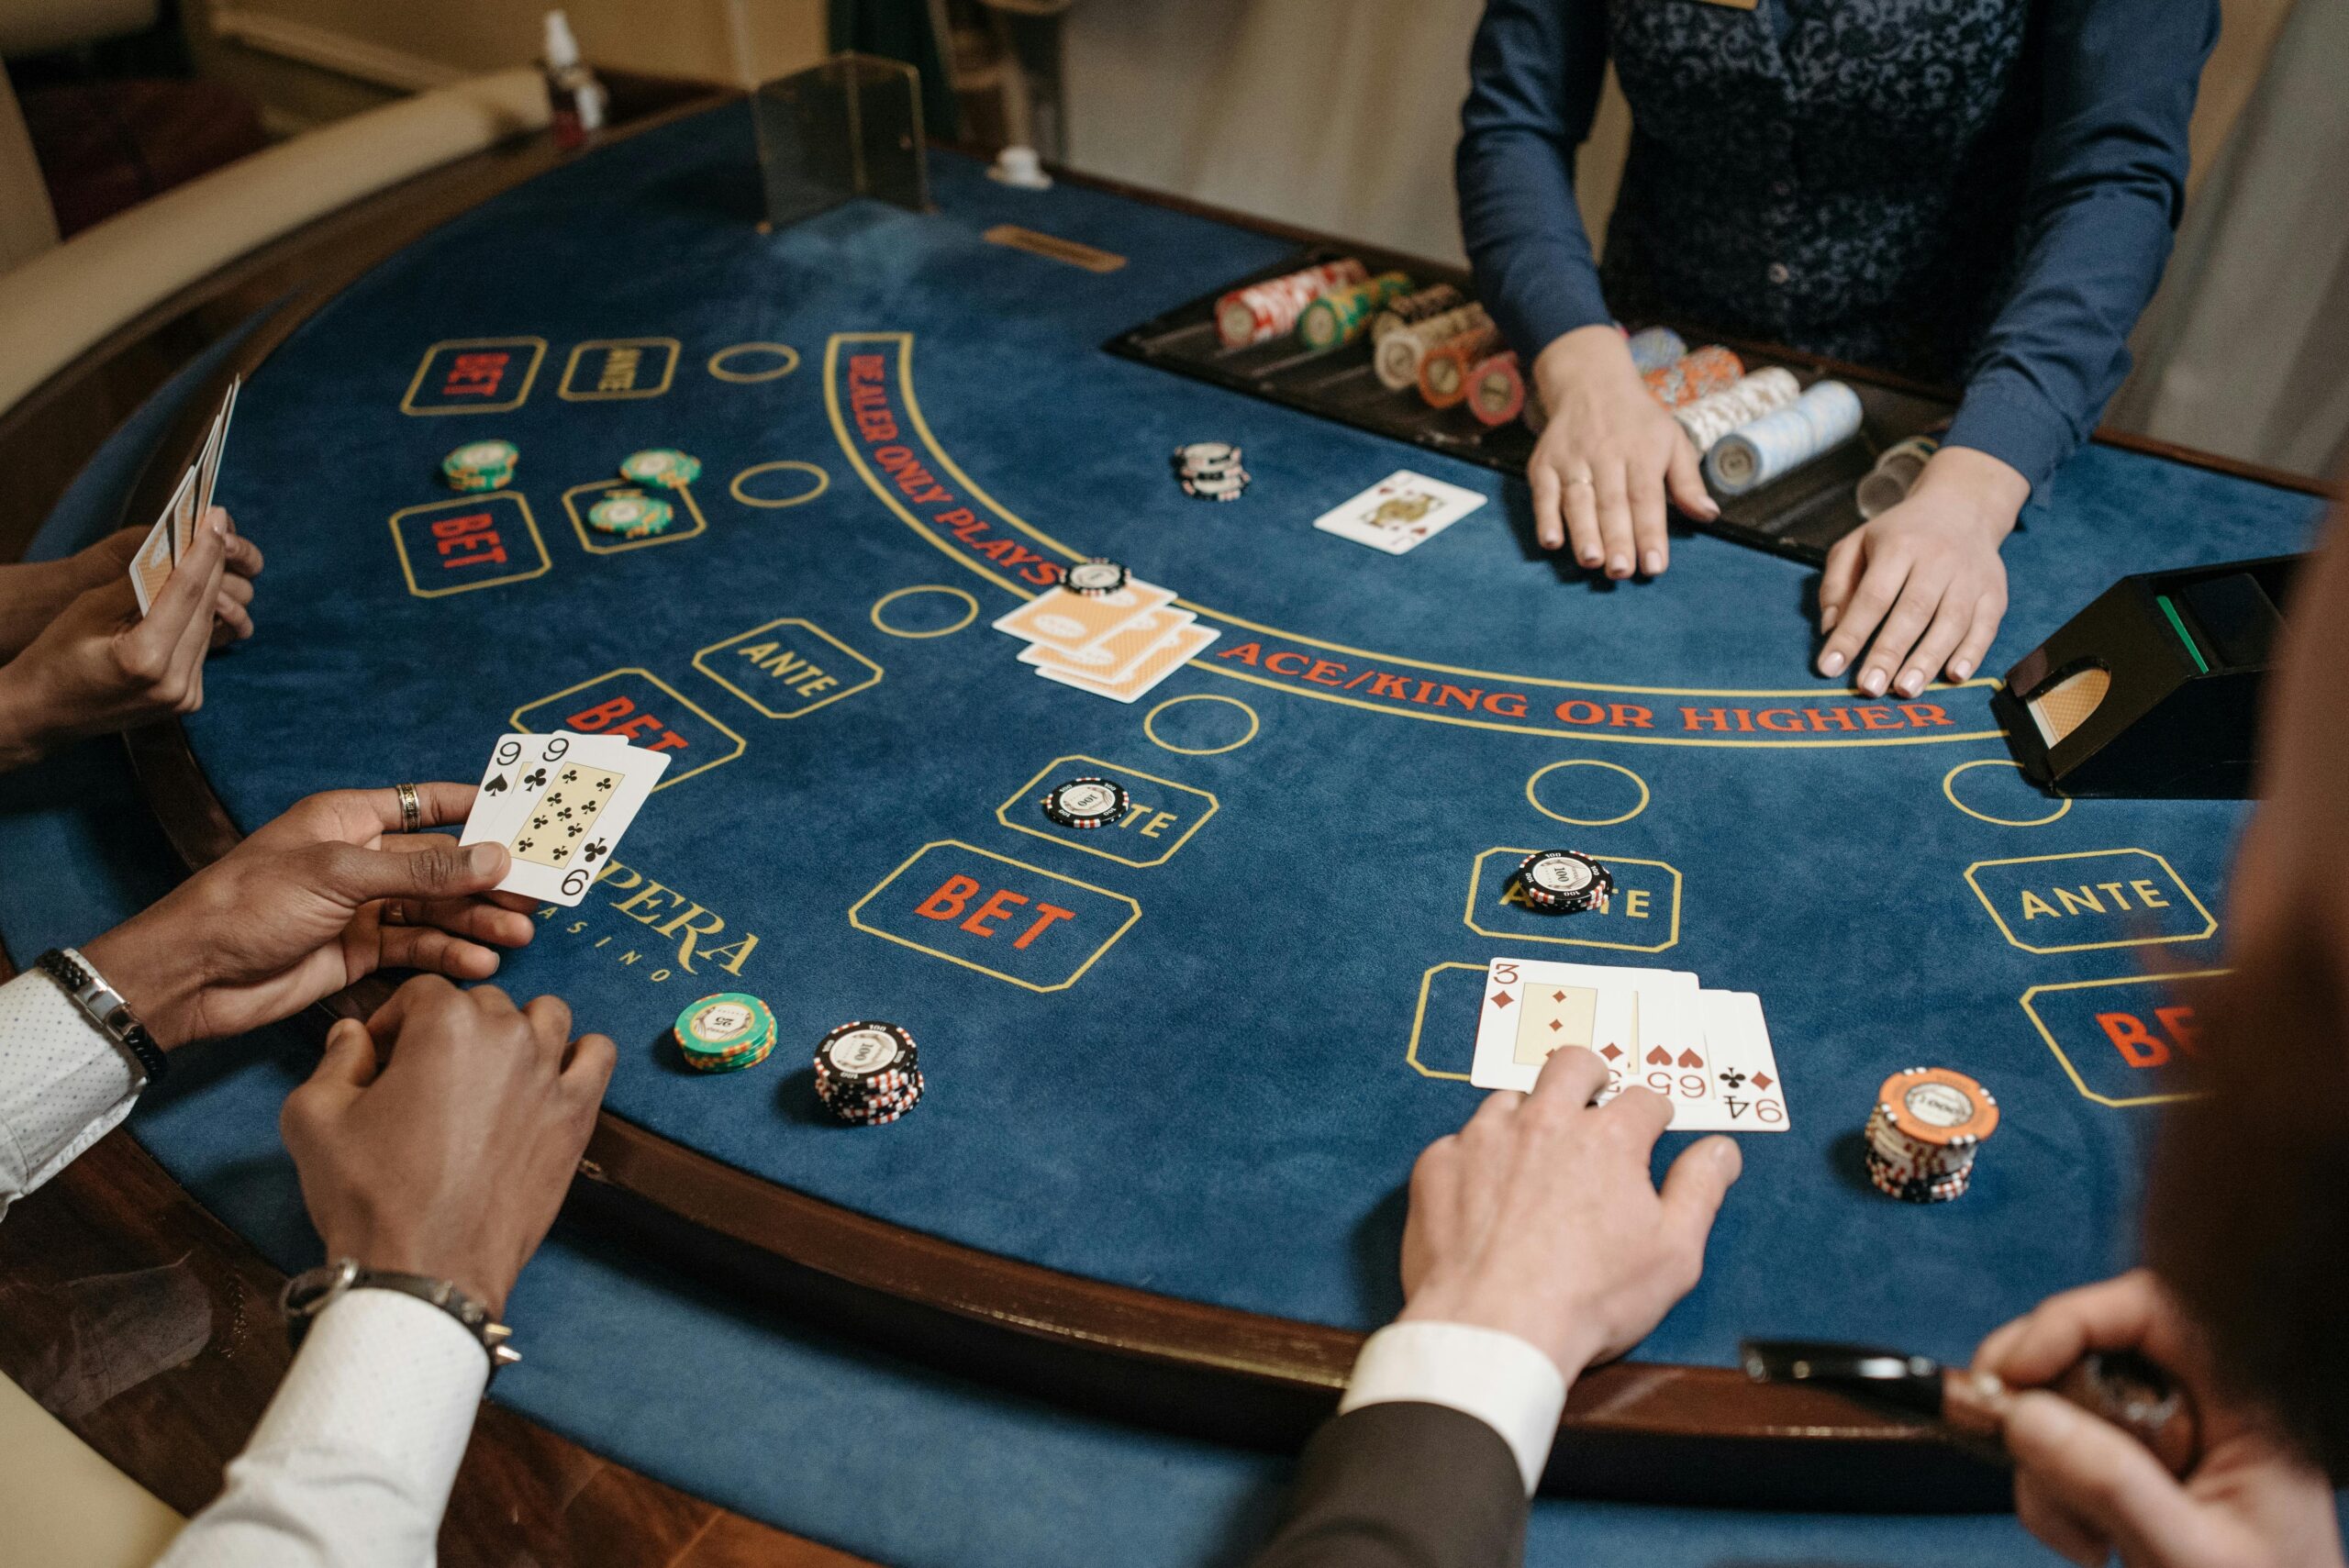 What options are offered by casinos